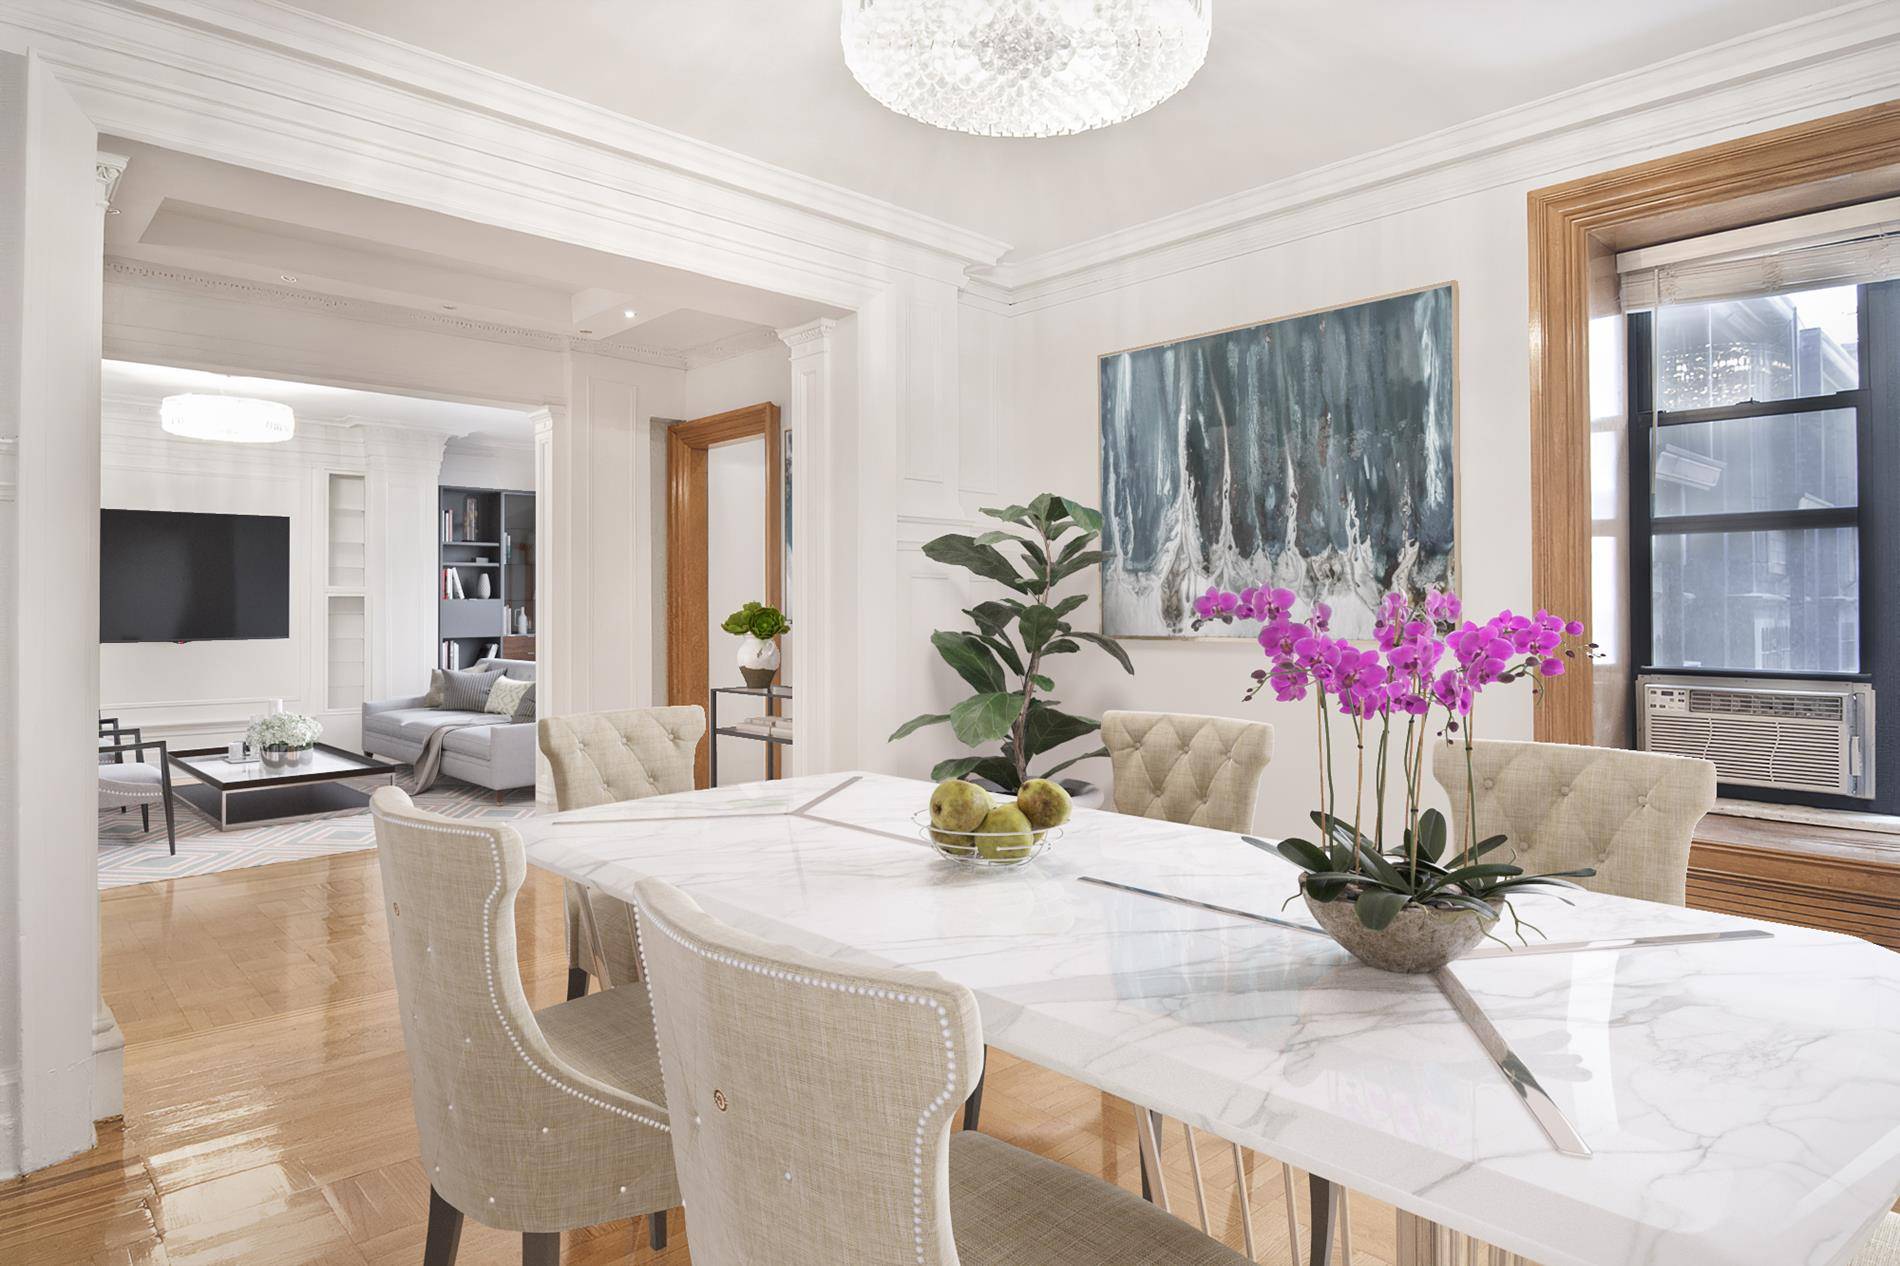 MAGNIFICENT and EXTRA LARGE Luxury 3 bed/ 3 bath No Fee Apartment in Midtown West with Grand Details and Abundant Light